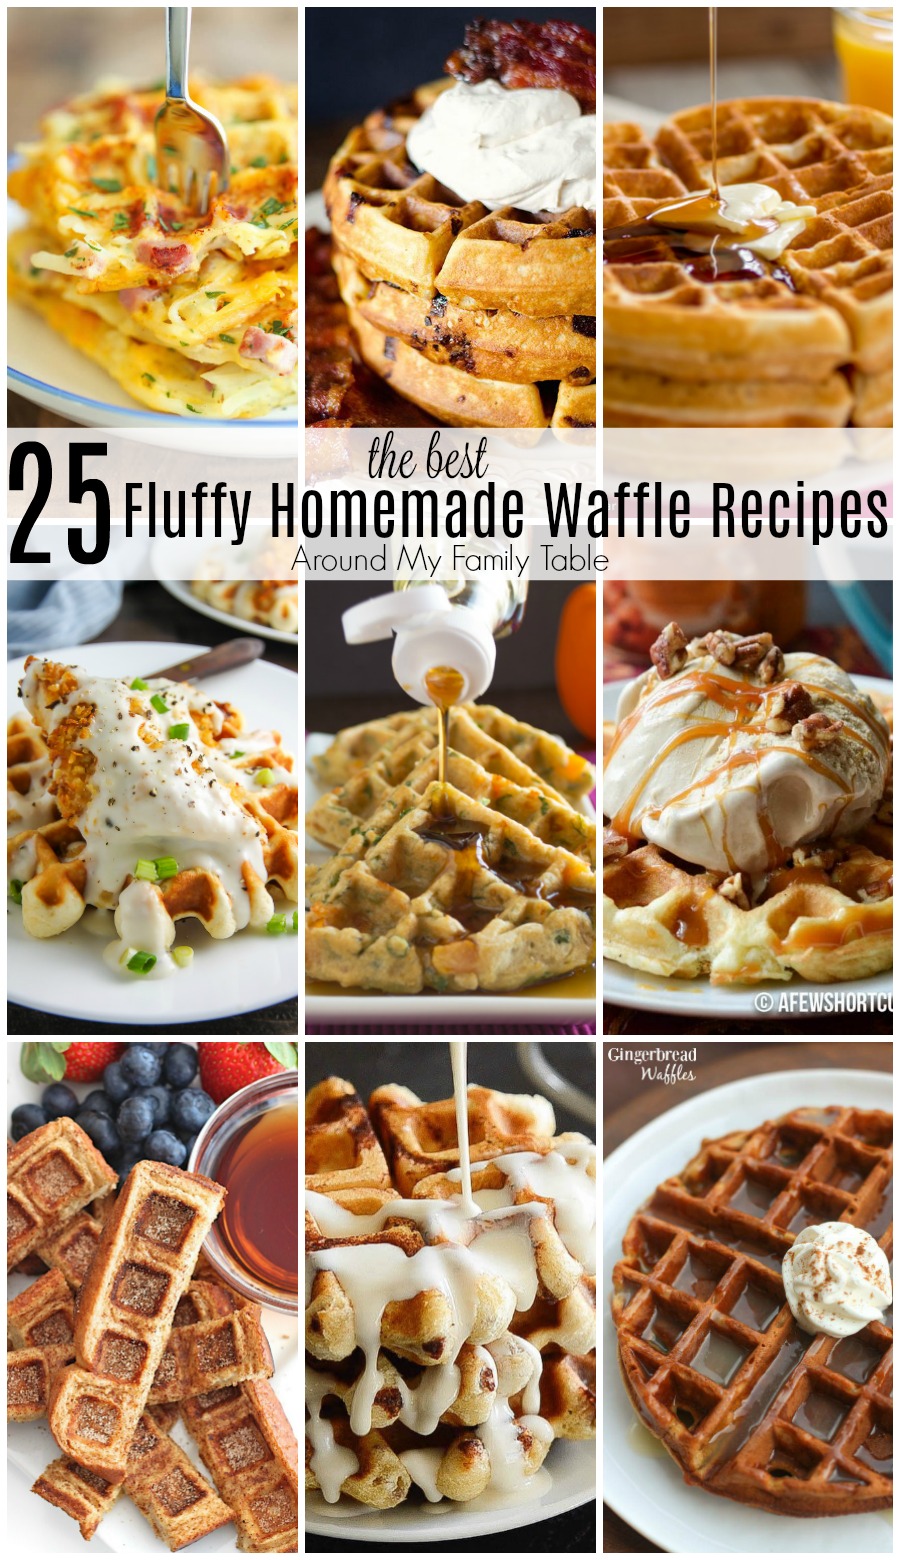 Weekends demand waffles!  It's a thing...promise.  So, I've gathered 25 of the best homemade waffle recipes for a delicious breakfast the whole family will love.  